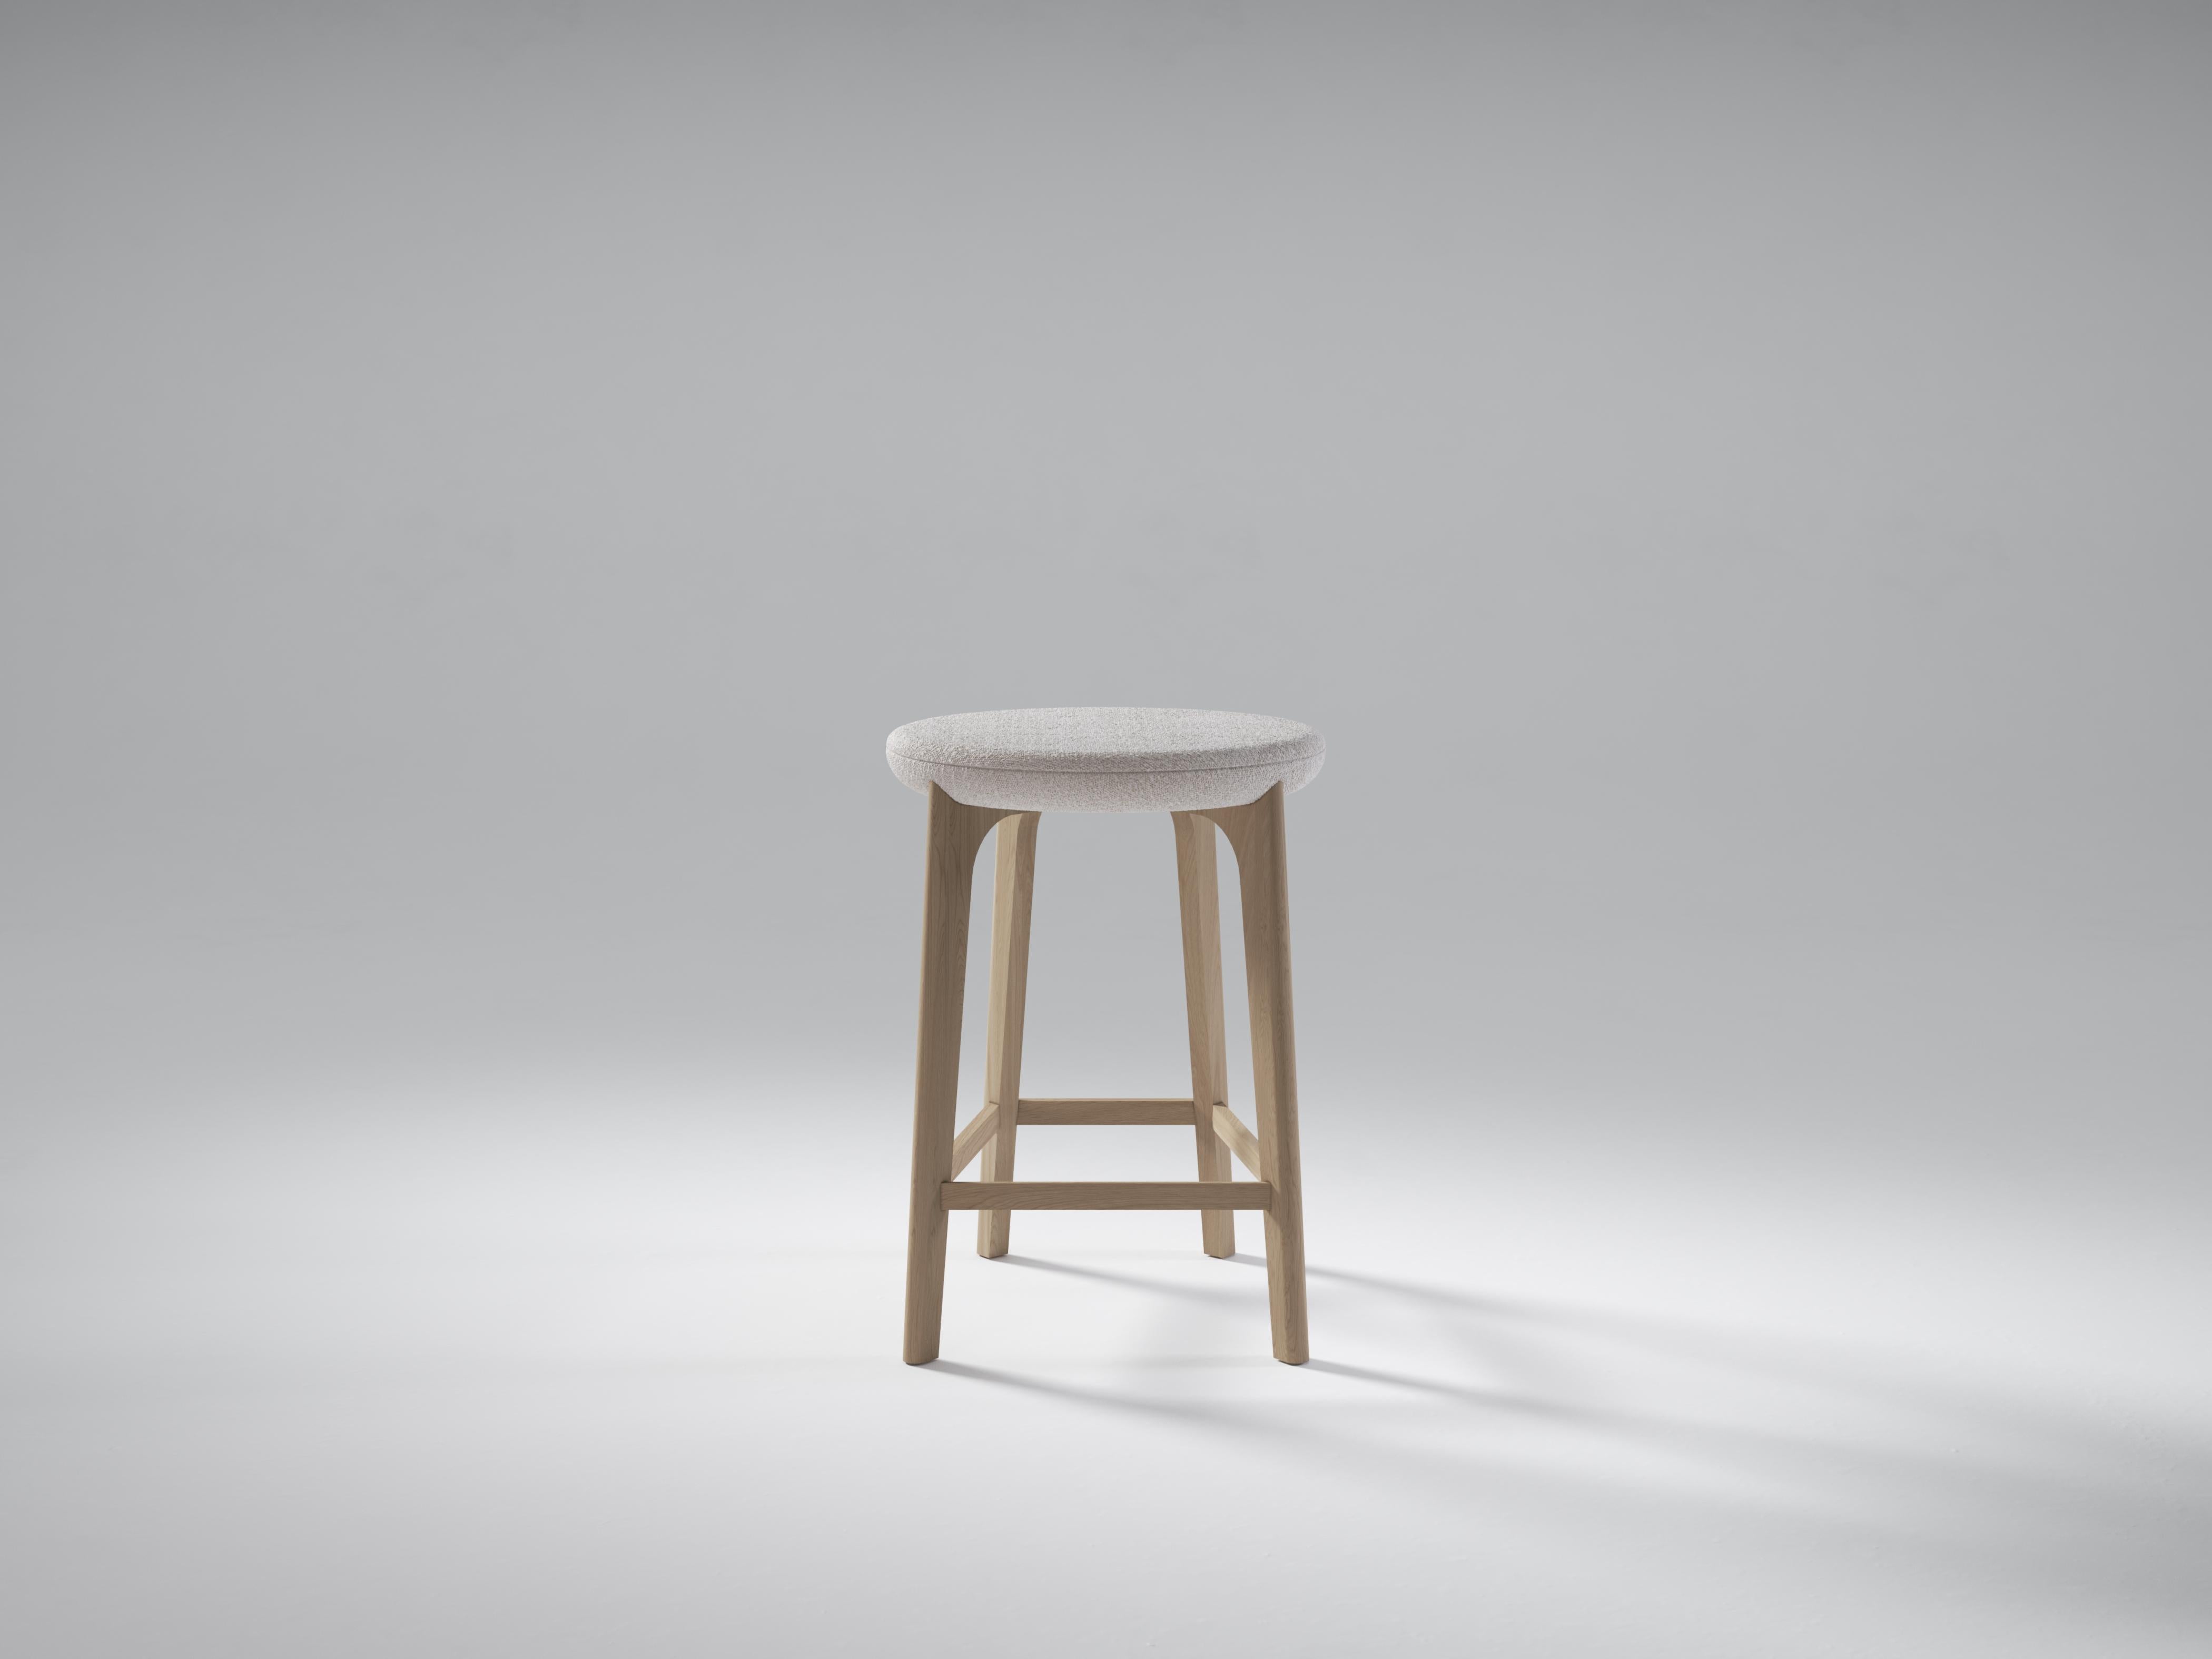 Richmond Barstool is an extension of the Richmond family in a literal sense. The Richmond Barstool takes the language of the Richmond dining chair but translates the form into something quite unique. A lower back allows for a less obtrusive piece &